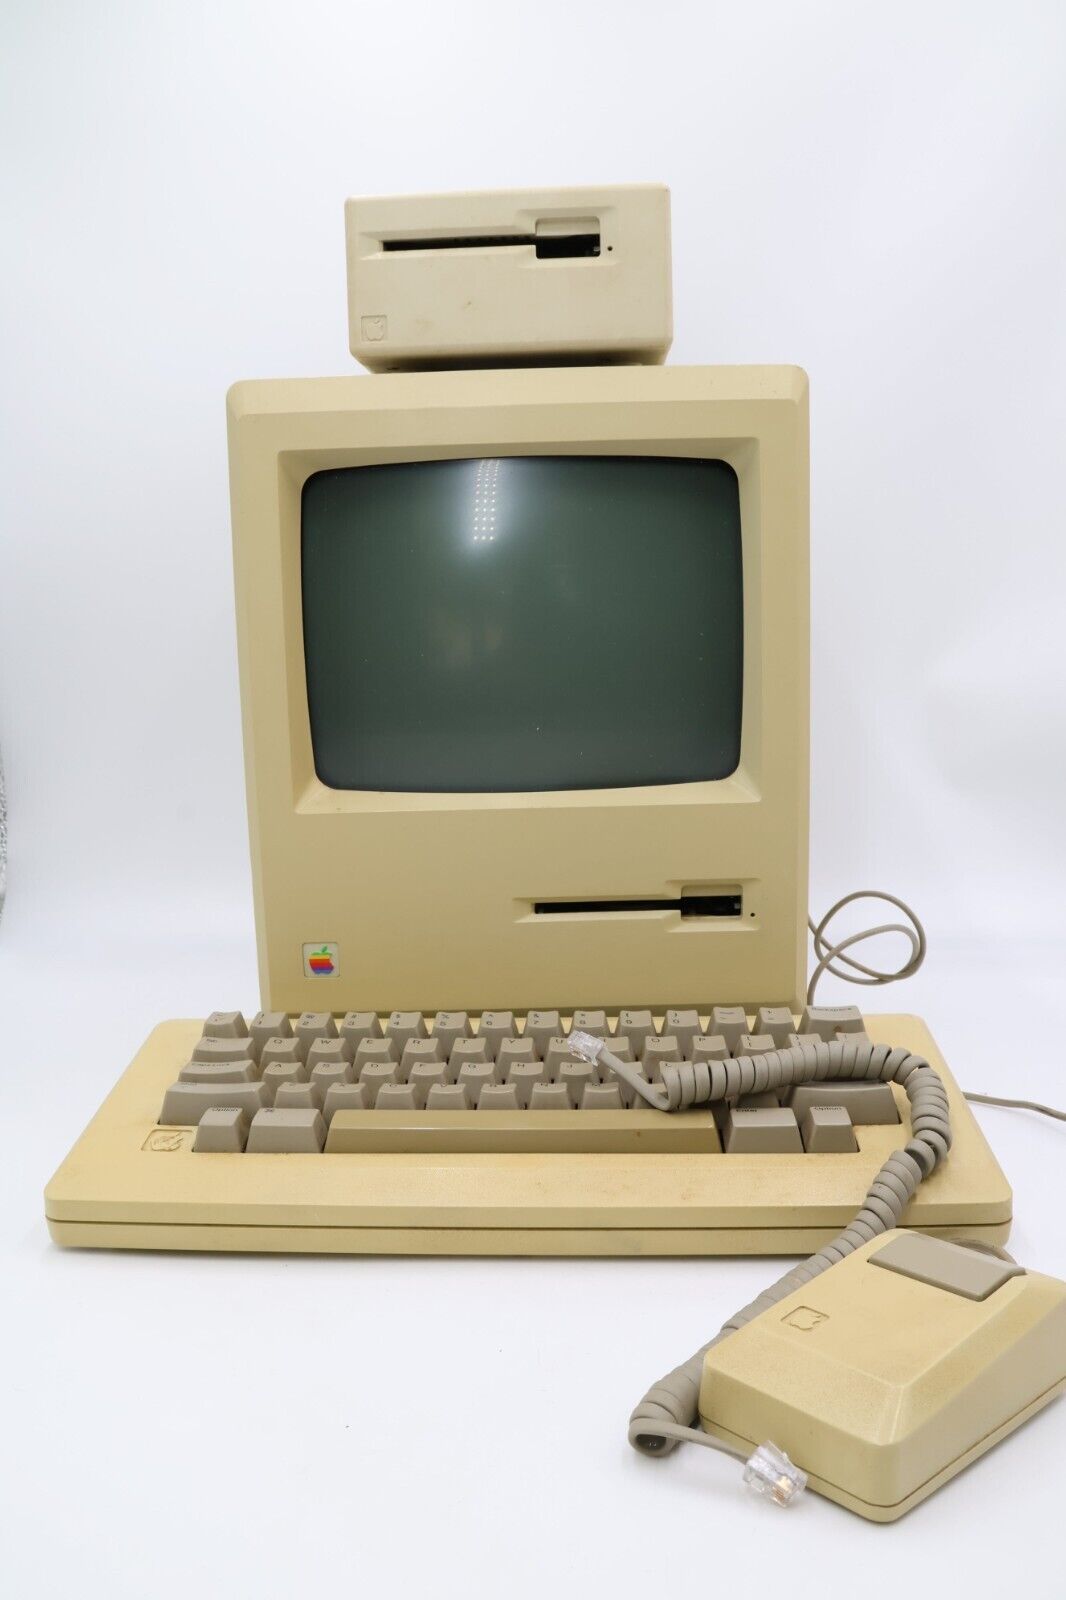 Apple Macintosh 128K M0001 Computer with Extra Drive, Mouse and Keyboard 1984